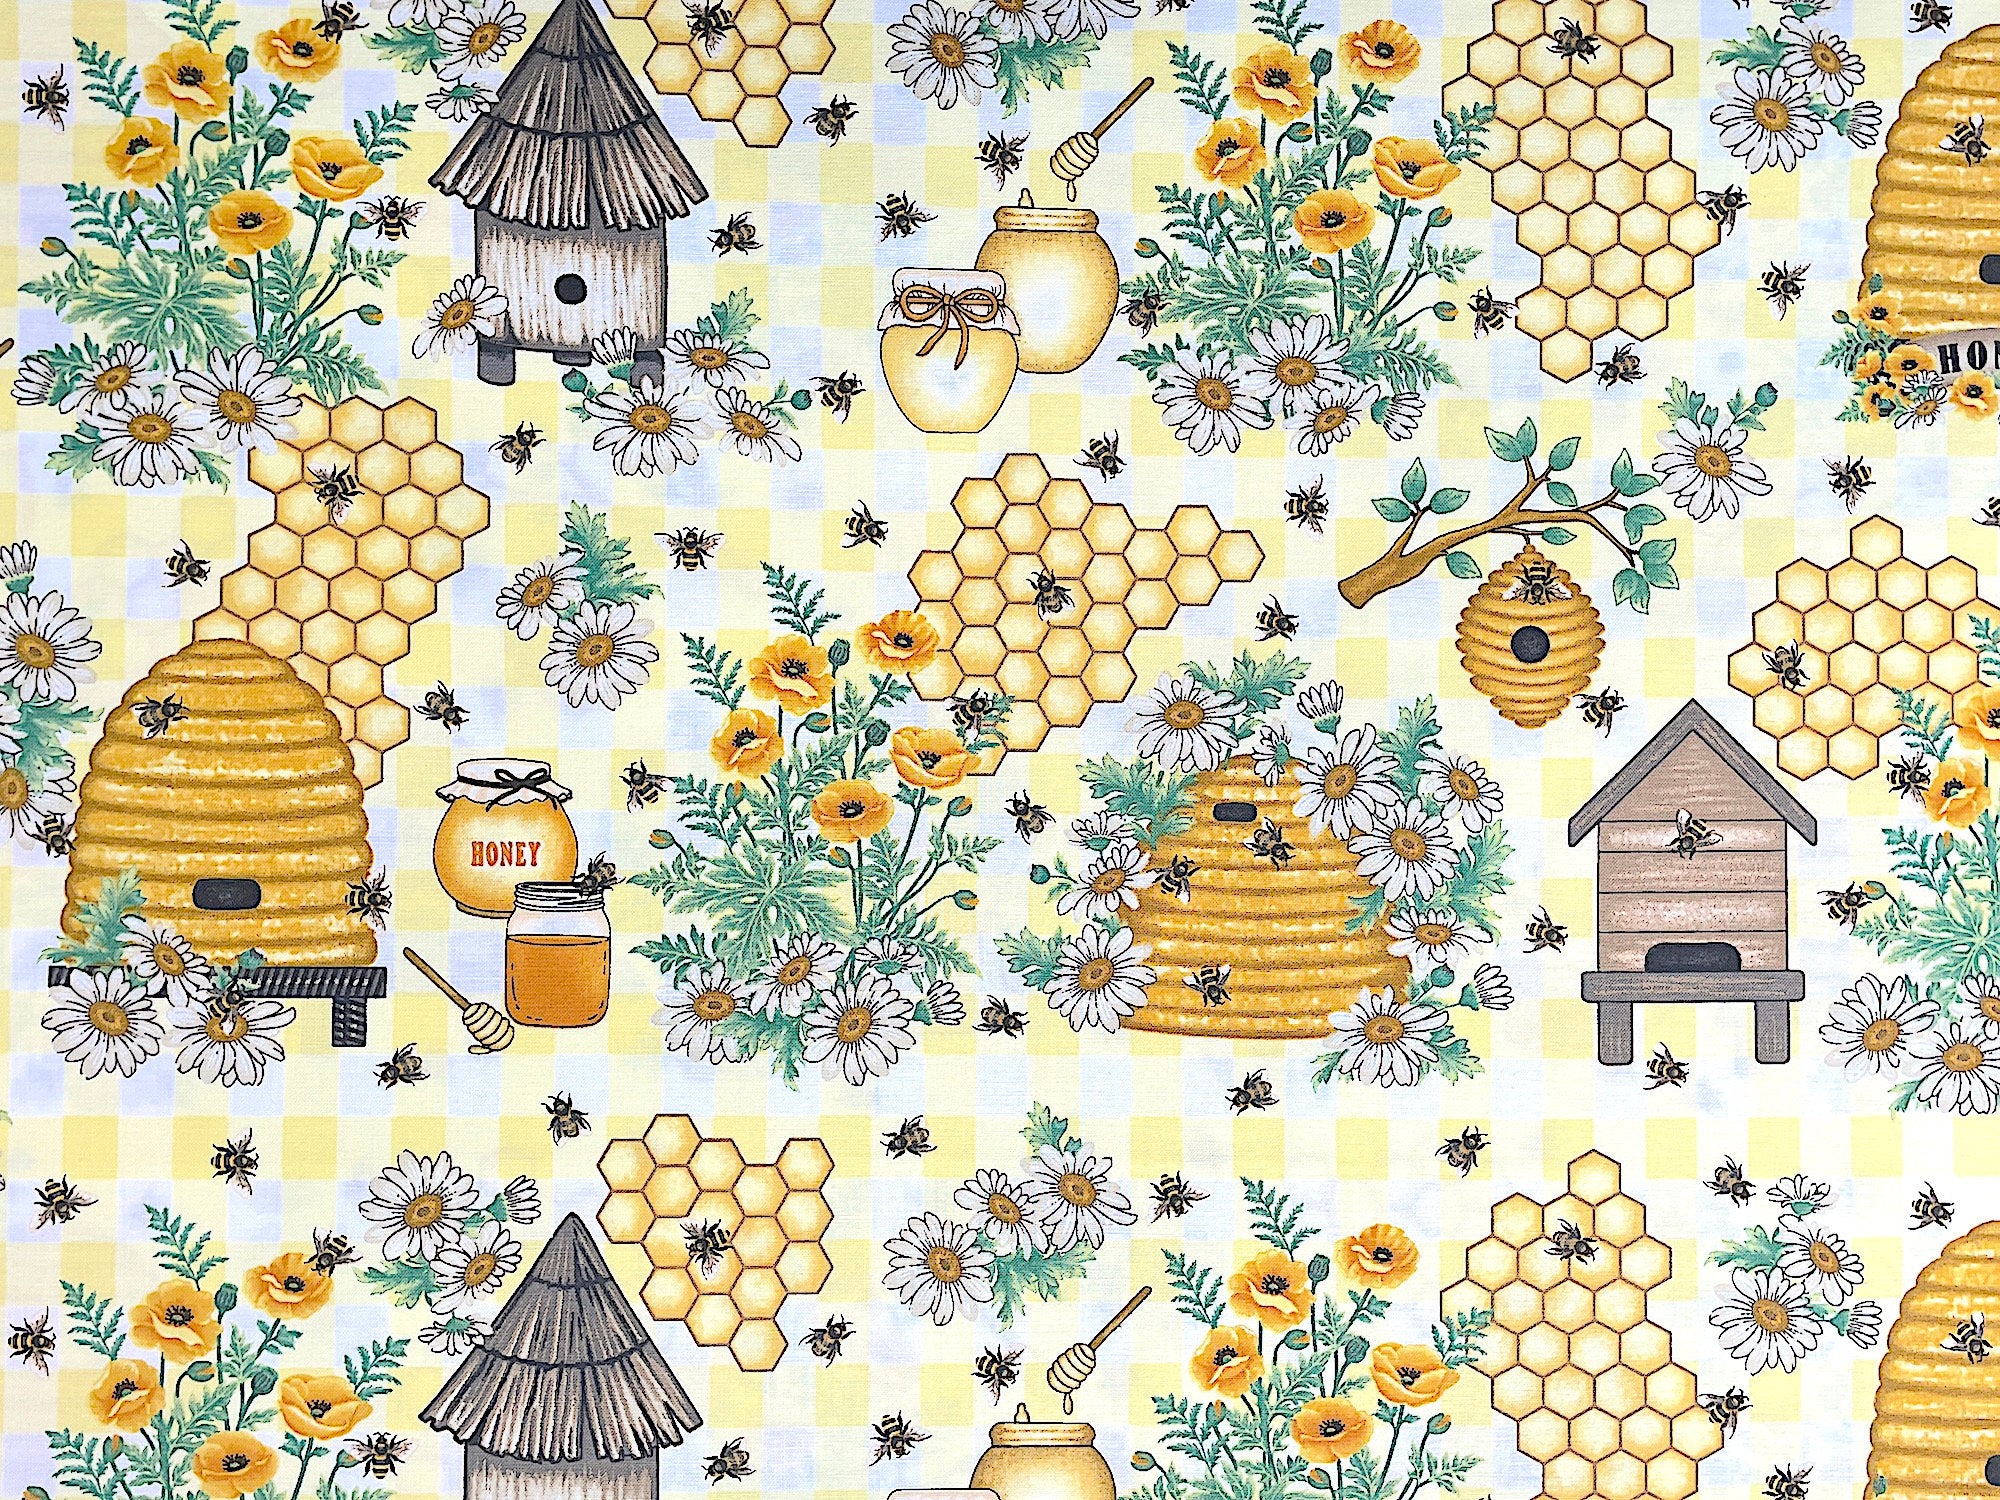 This fabric is part of the Bee All You Can Bee Collection by Art Loft. This yellow fabric is covered with bees, bee hives, bee houses, jars of honey and yellow poppies.